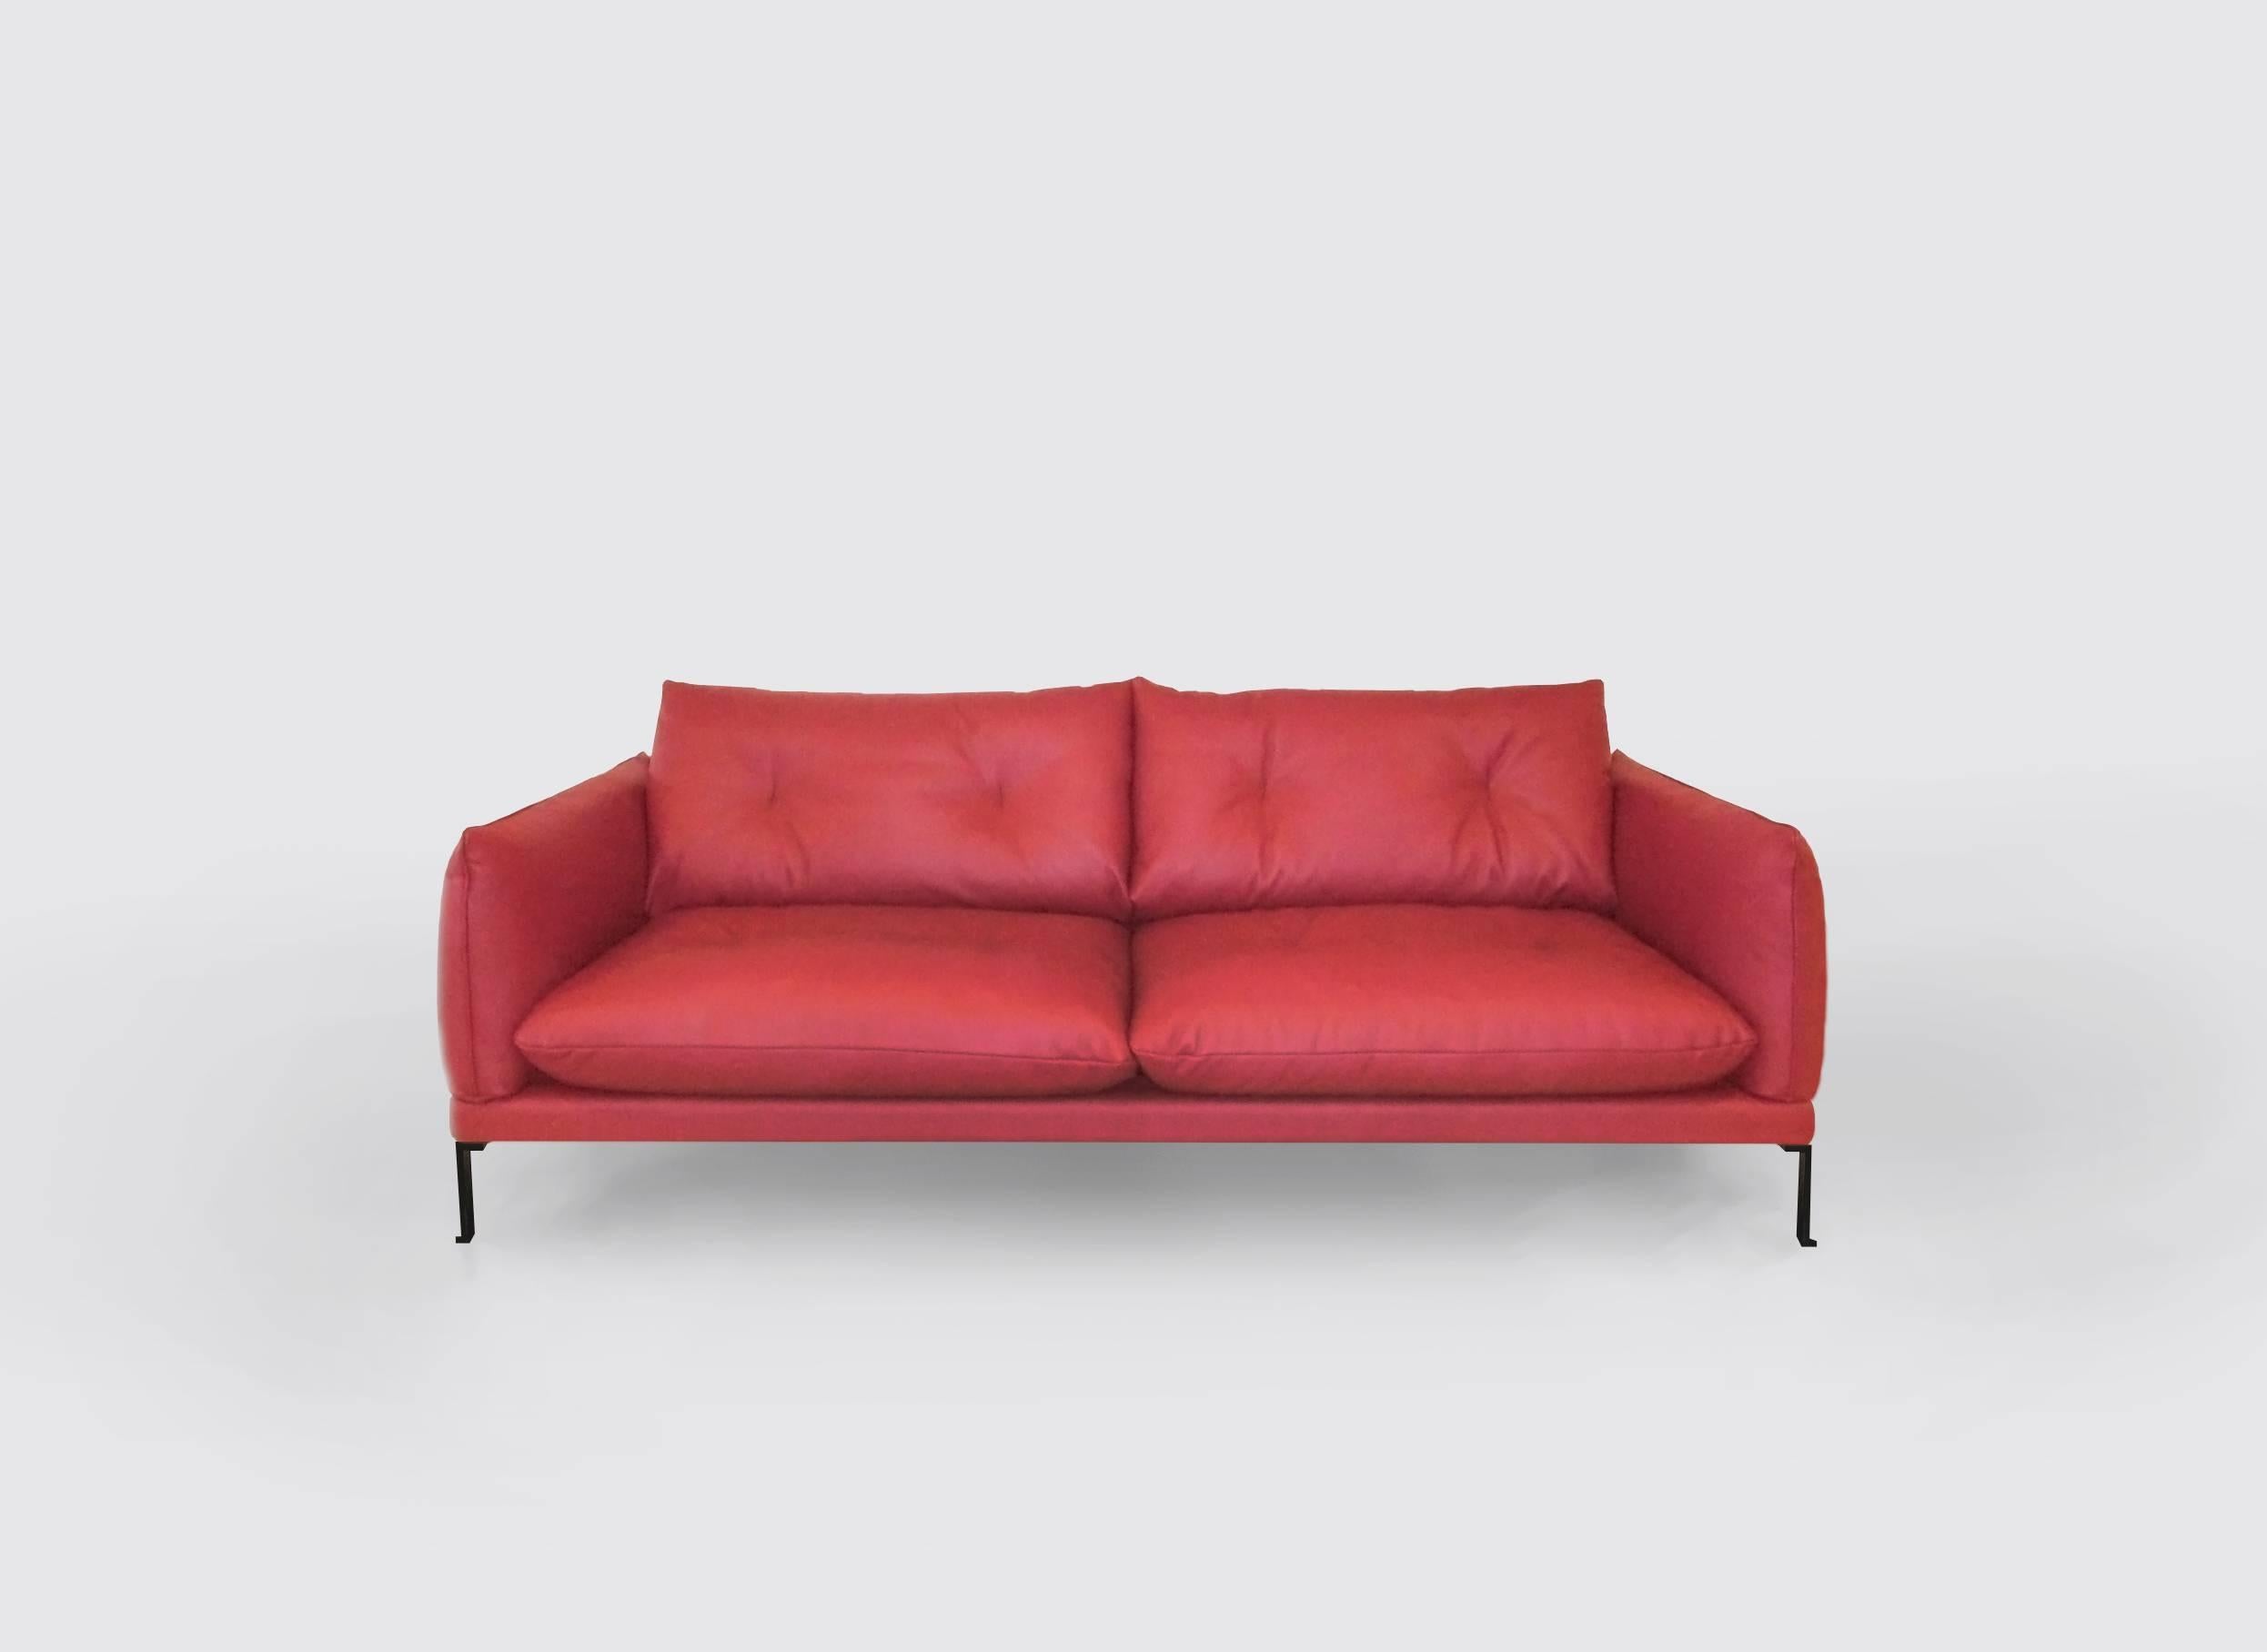 Santorini Handmade Contemporary Sofa, Tufted Cushions, Fabric Cover, Metal Legs In New Condition For Sale In London, GB